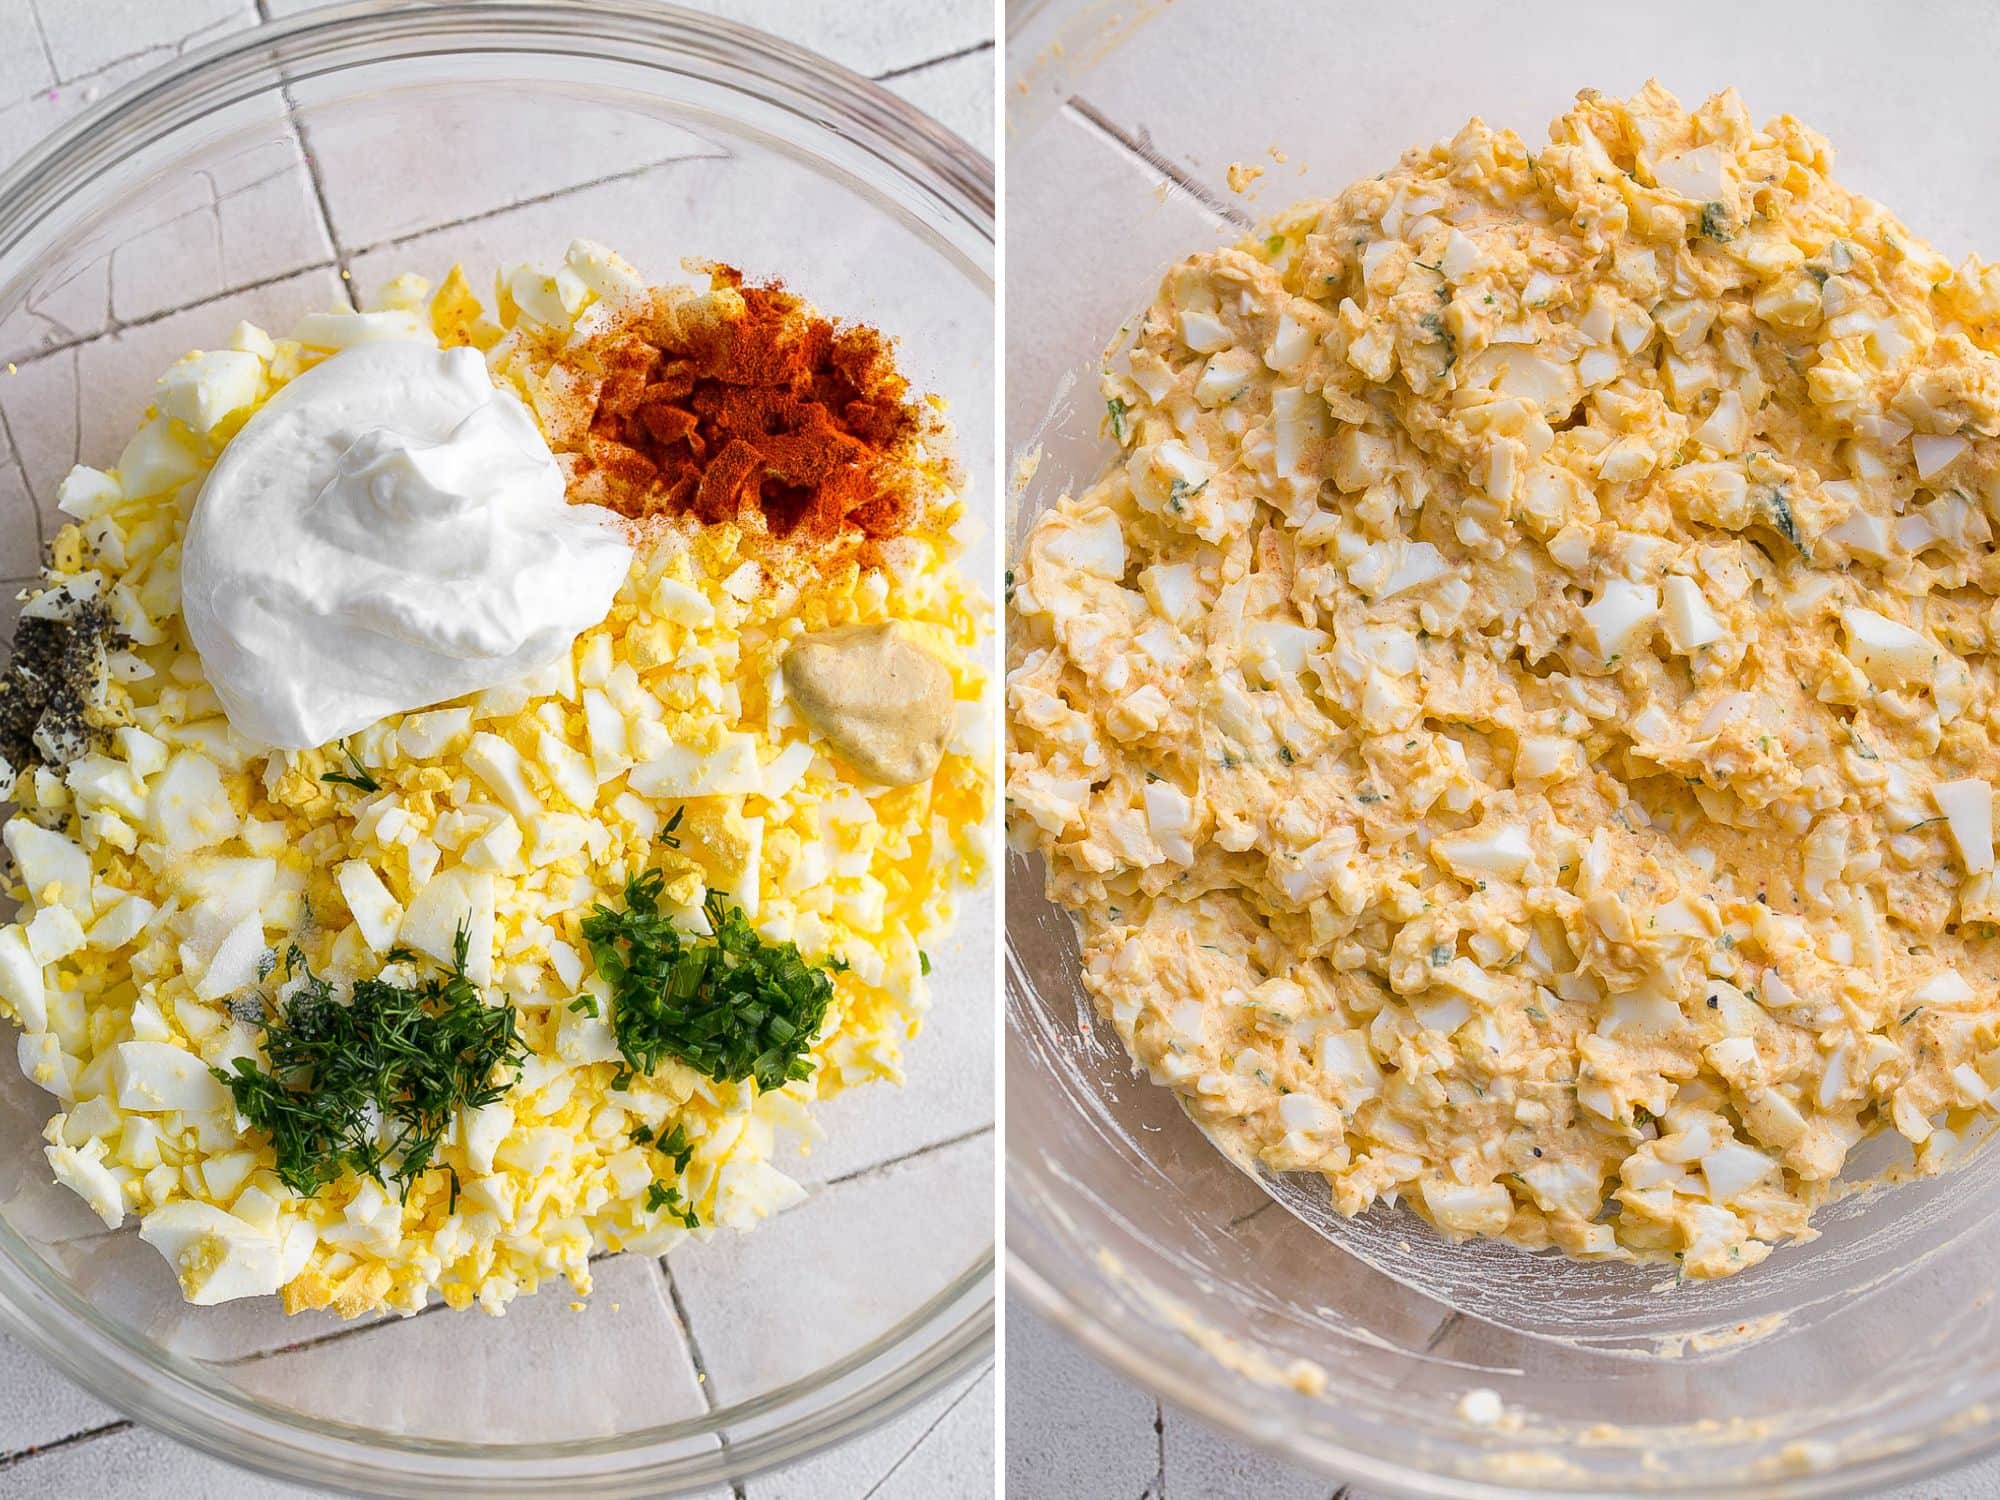 How to make Egg Salad with Dill.